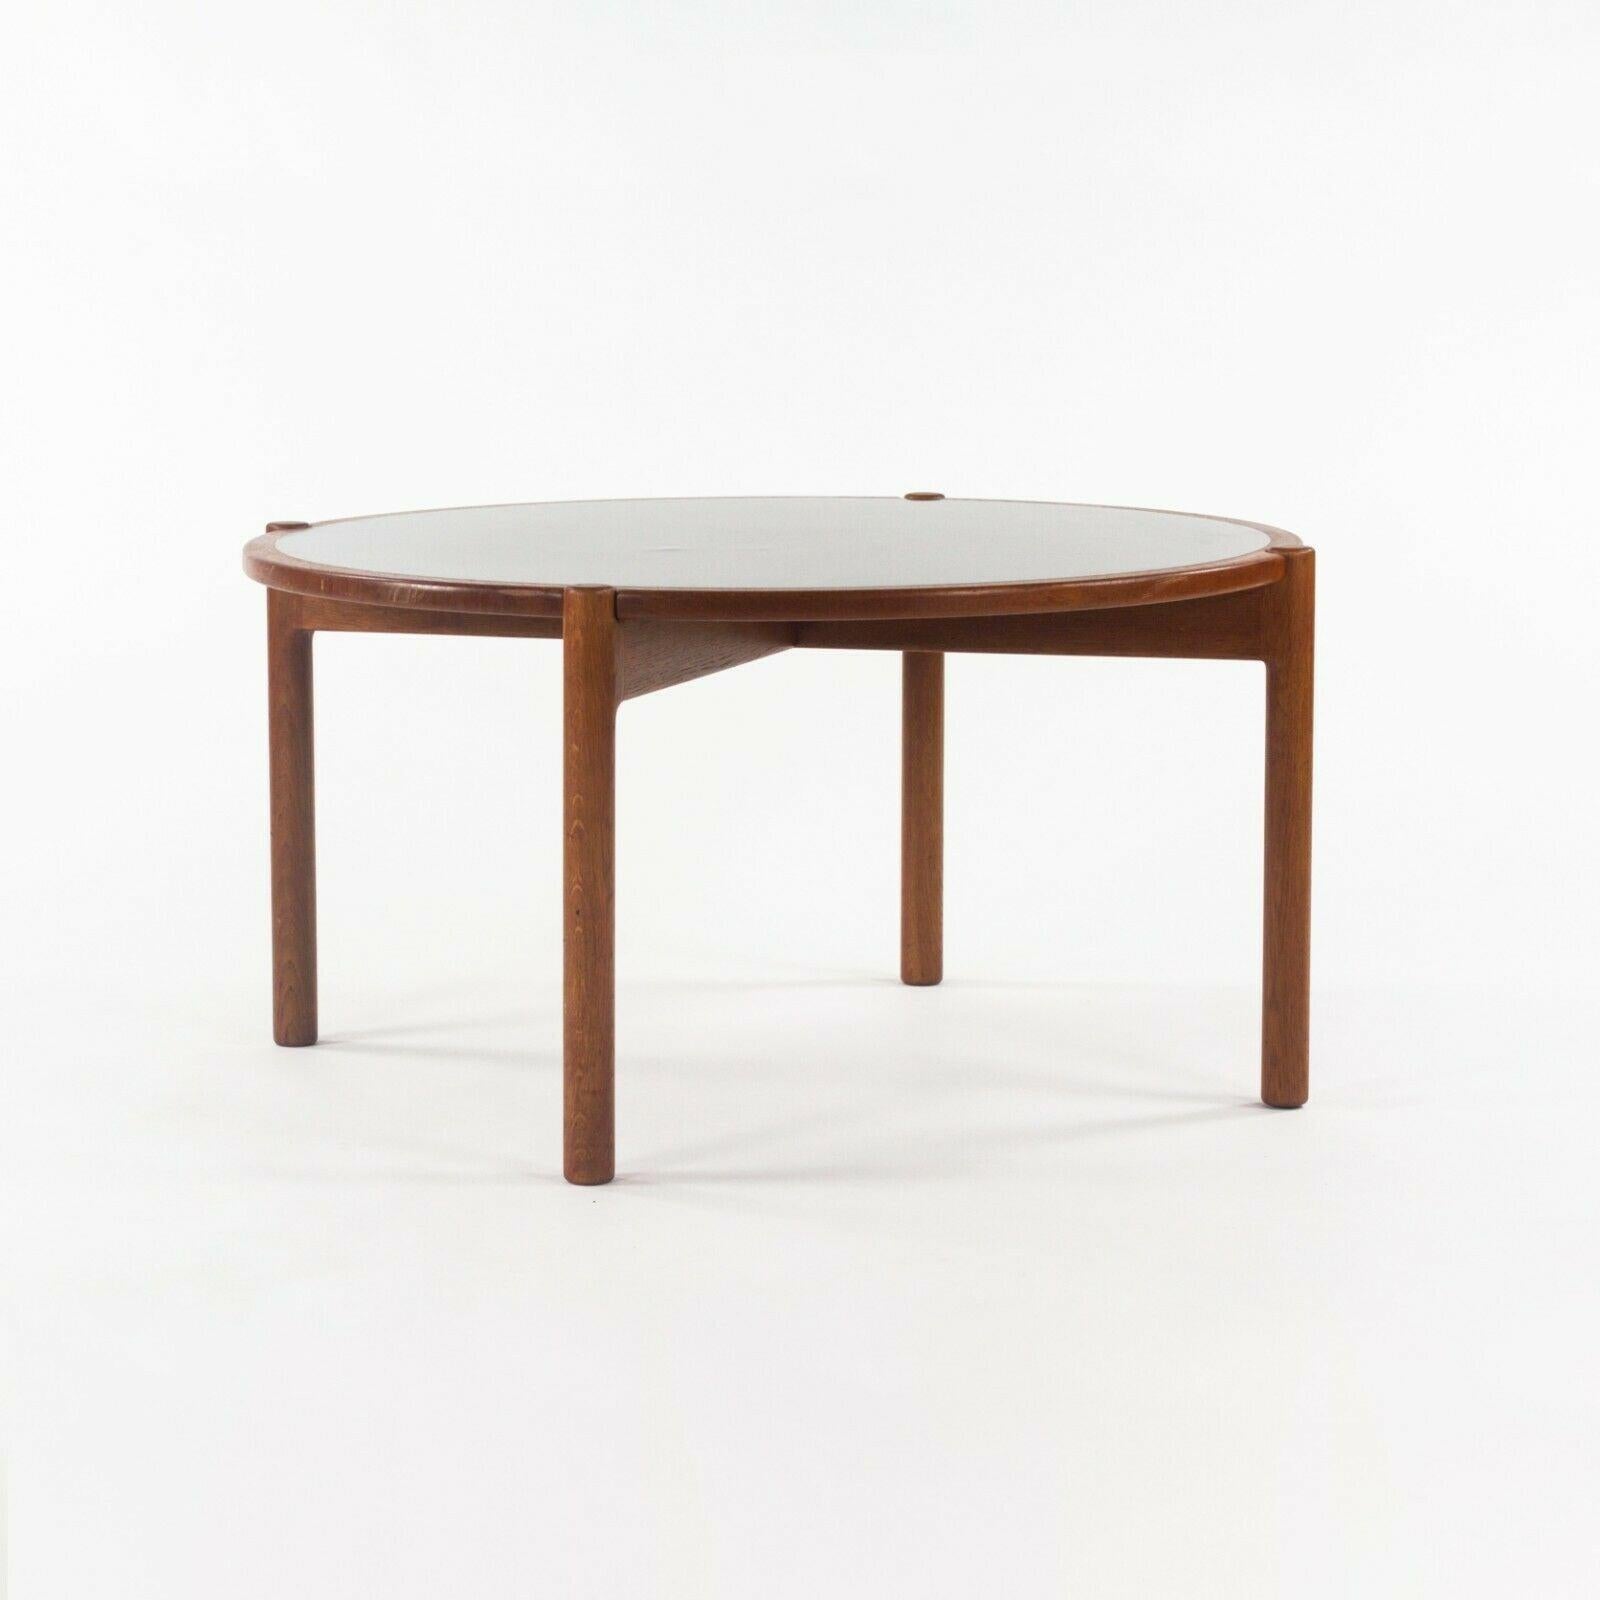 Listed for sale is a Hans Wegner for Johannes Hansen flip top coffee table (or could be used as a large end table). The table appears to be constructed from brown oak, which has patinated beautifully over the years. This is an authentic example,